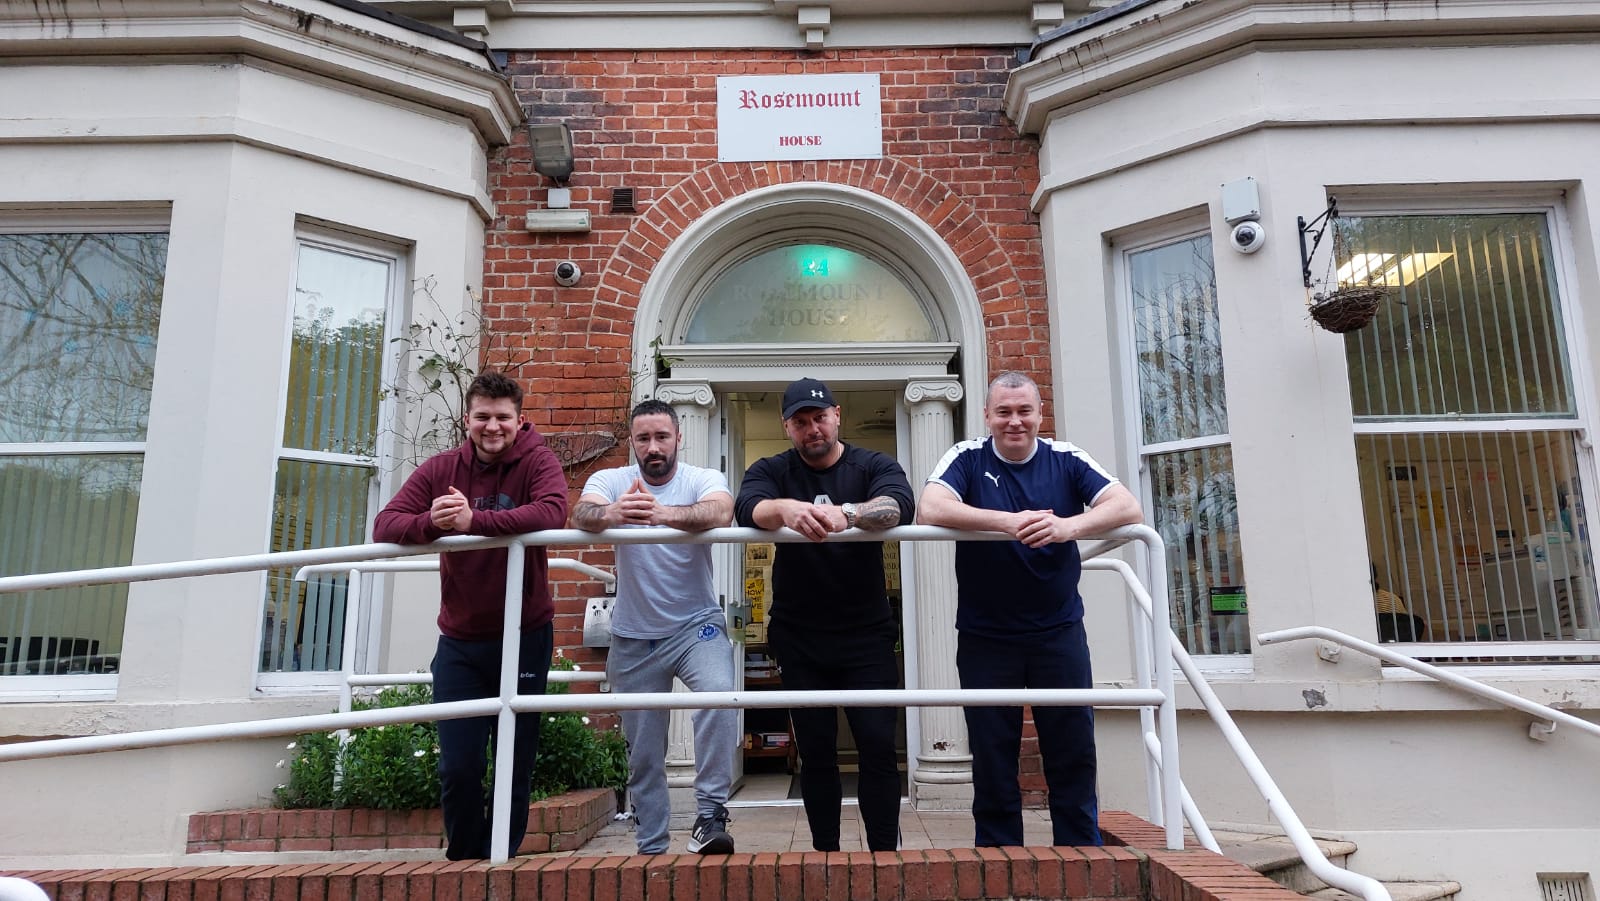 POSITIVE MENTAL HEALTH: Michael Opie of Olympus Gym with Rosemount House residents Corey McLaughlin, Gerard Devlin and Dean Mallon